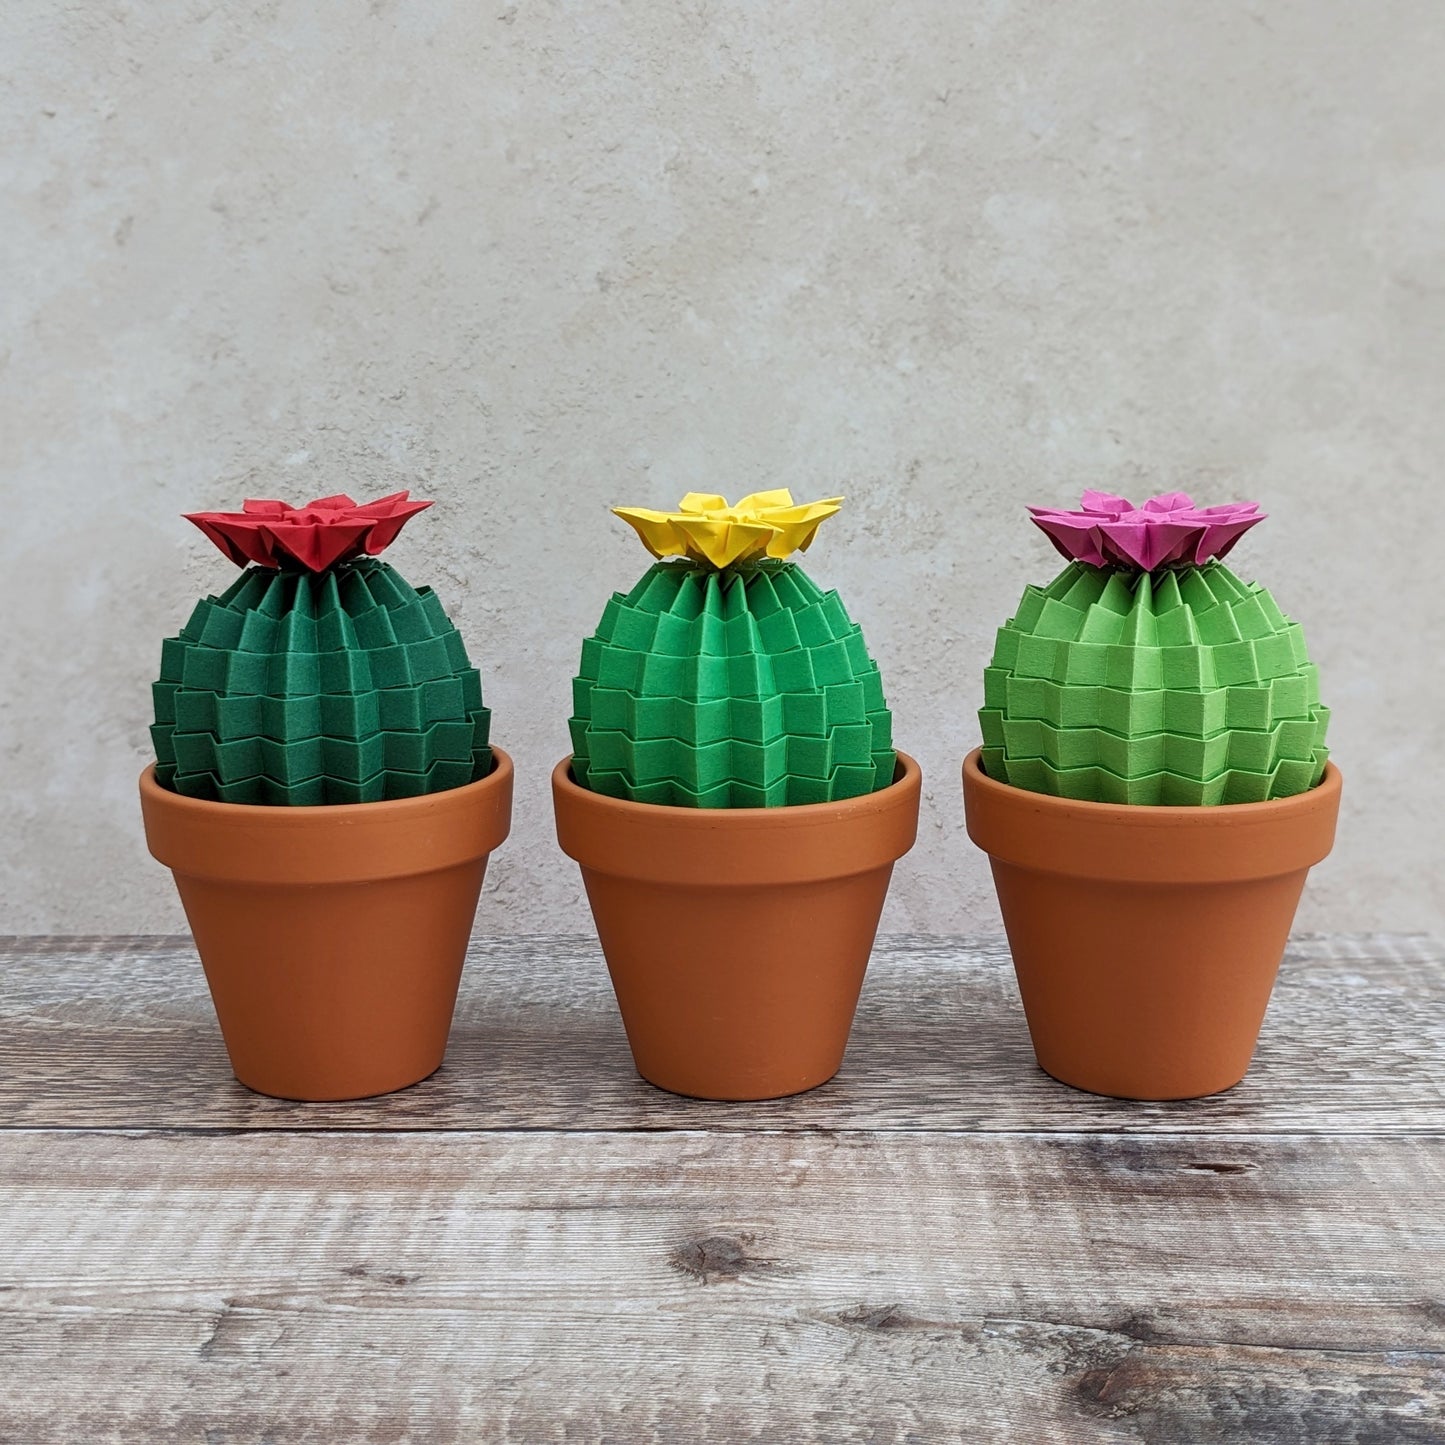 Dark green large origami paper cactus, artificial potted plant